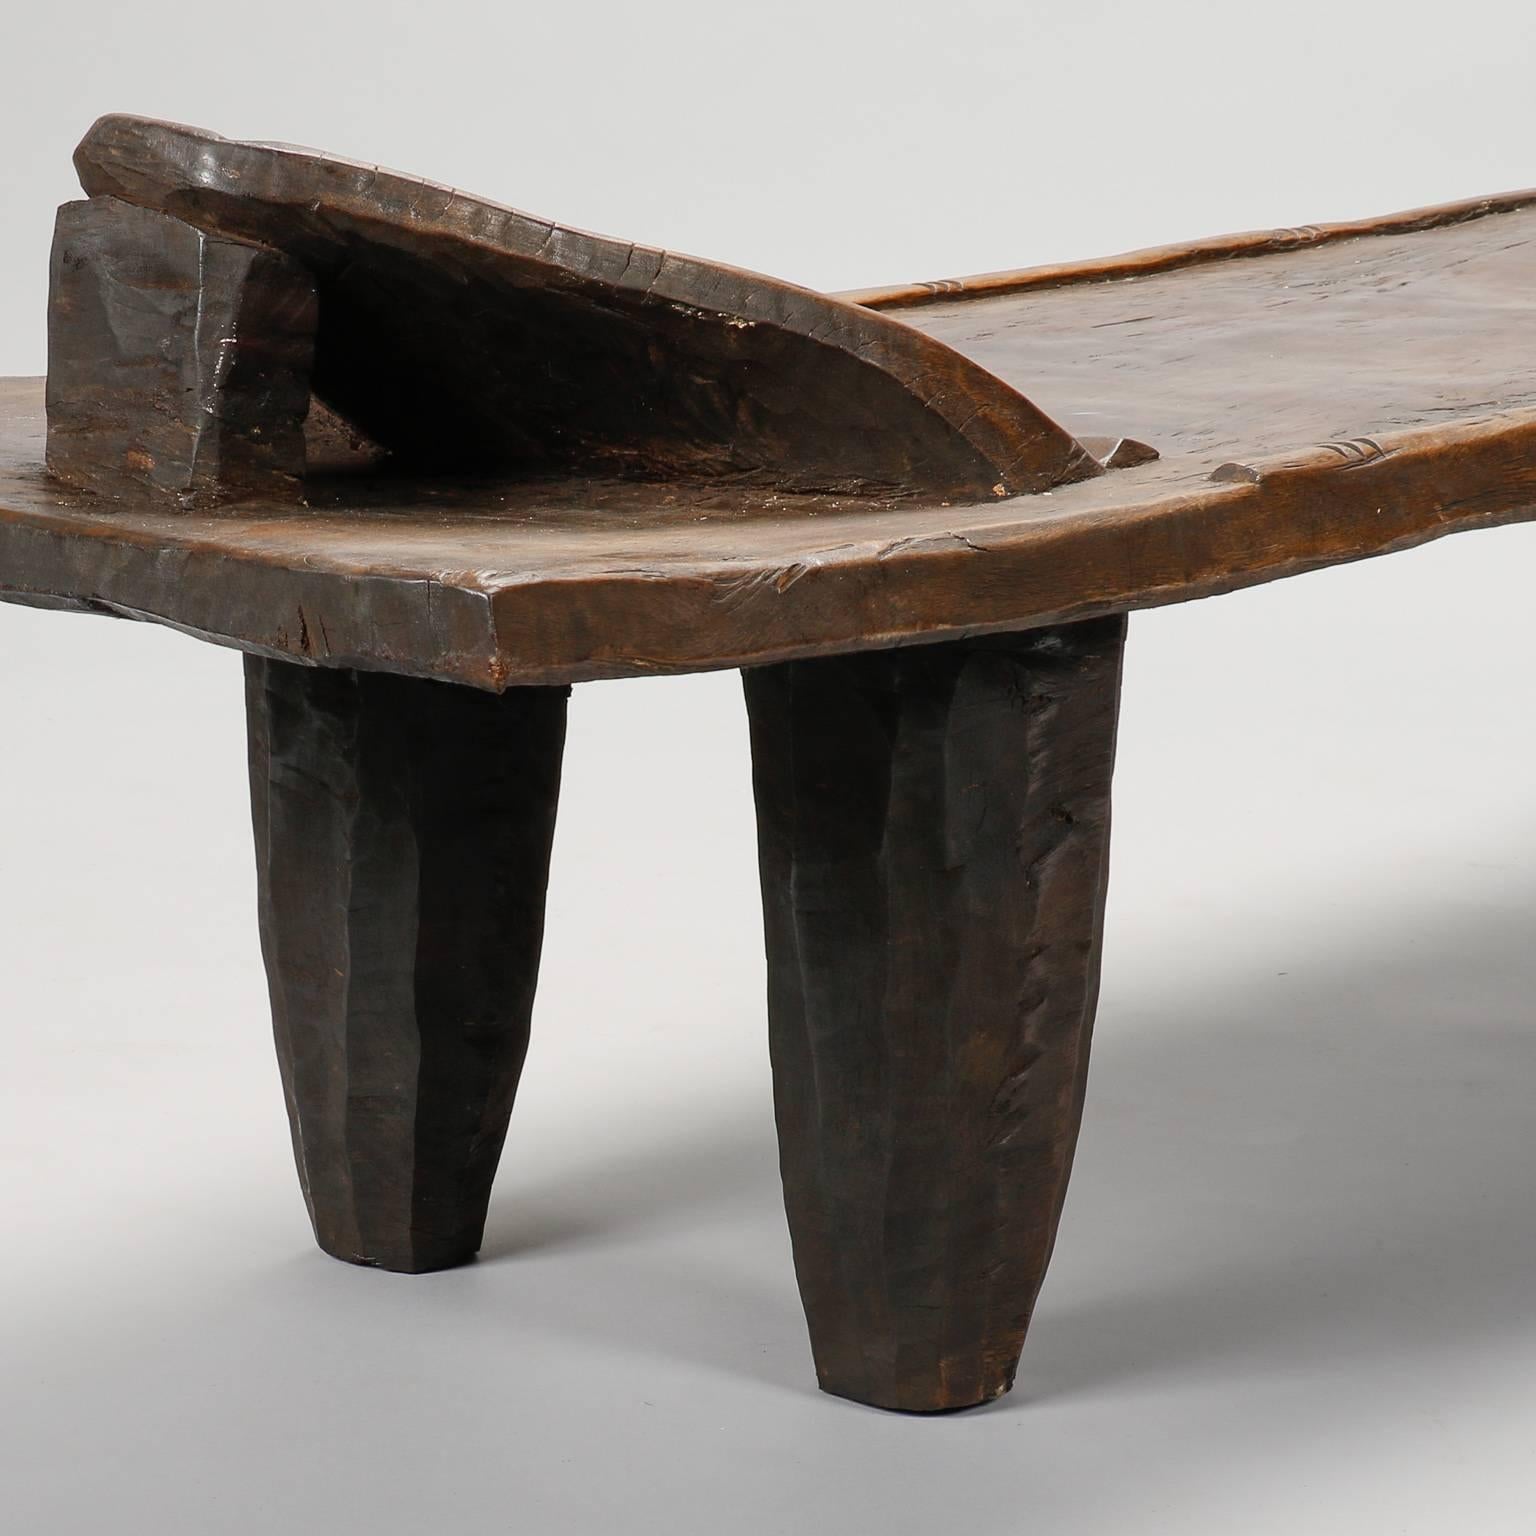 Carved Dark Wood Senufo Day Bed or Bench from Ivory Coast